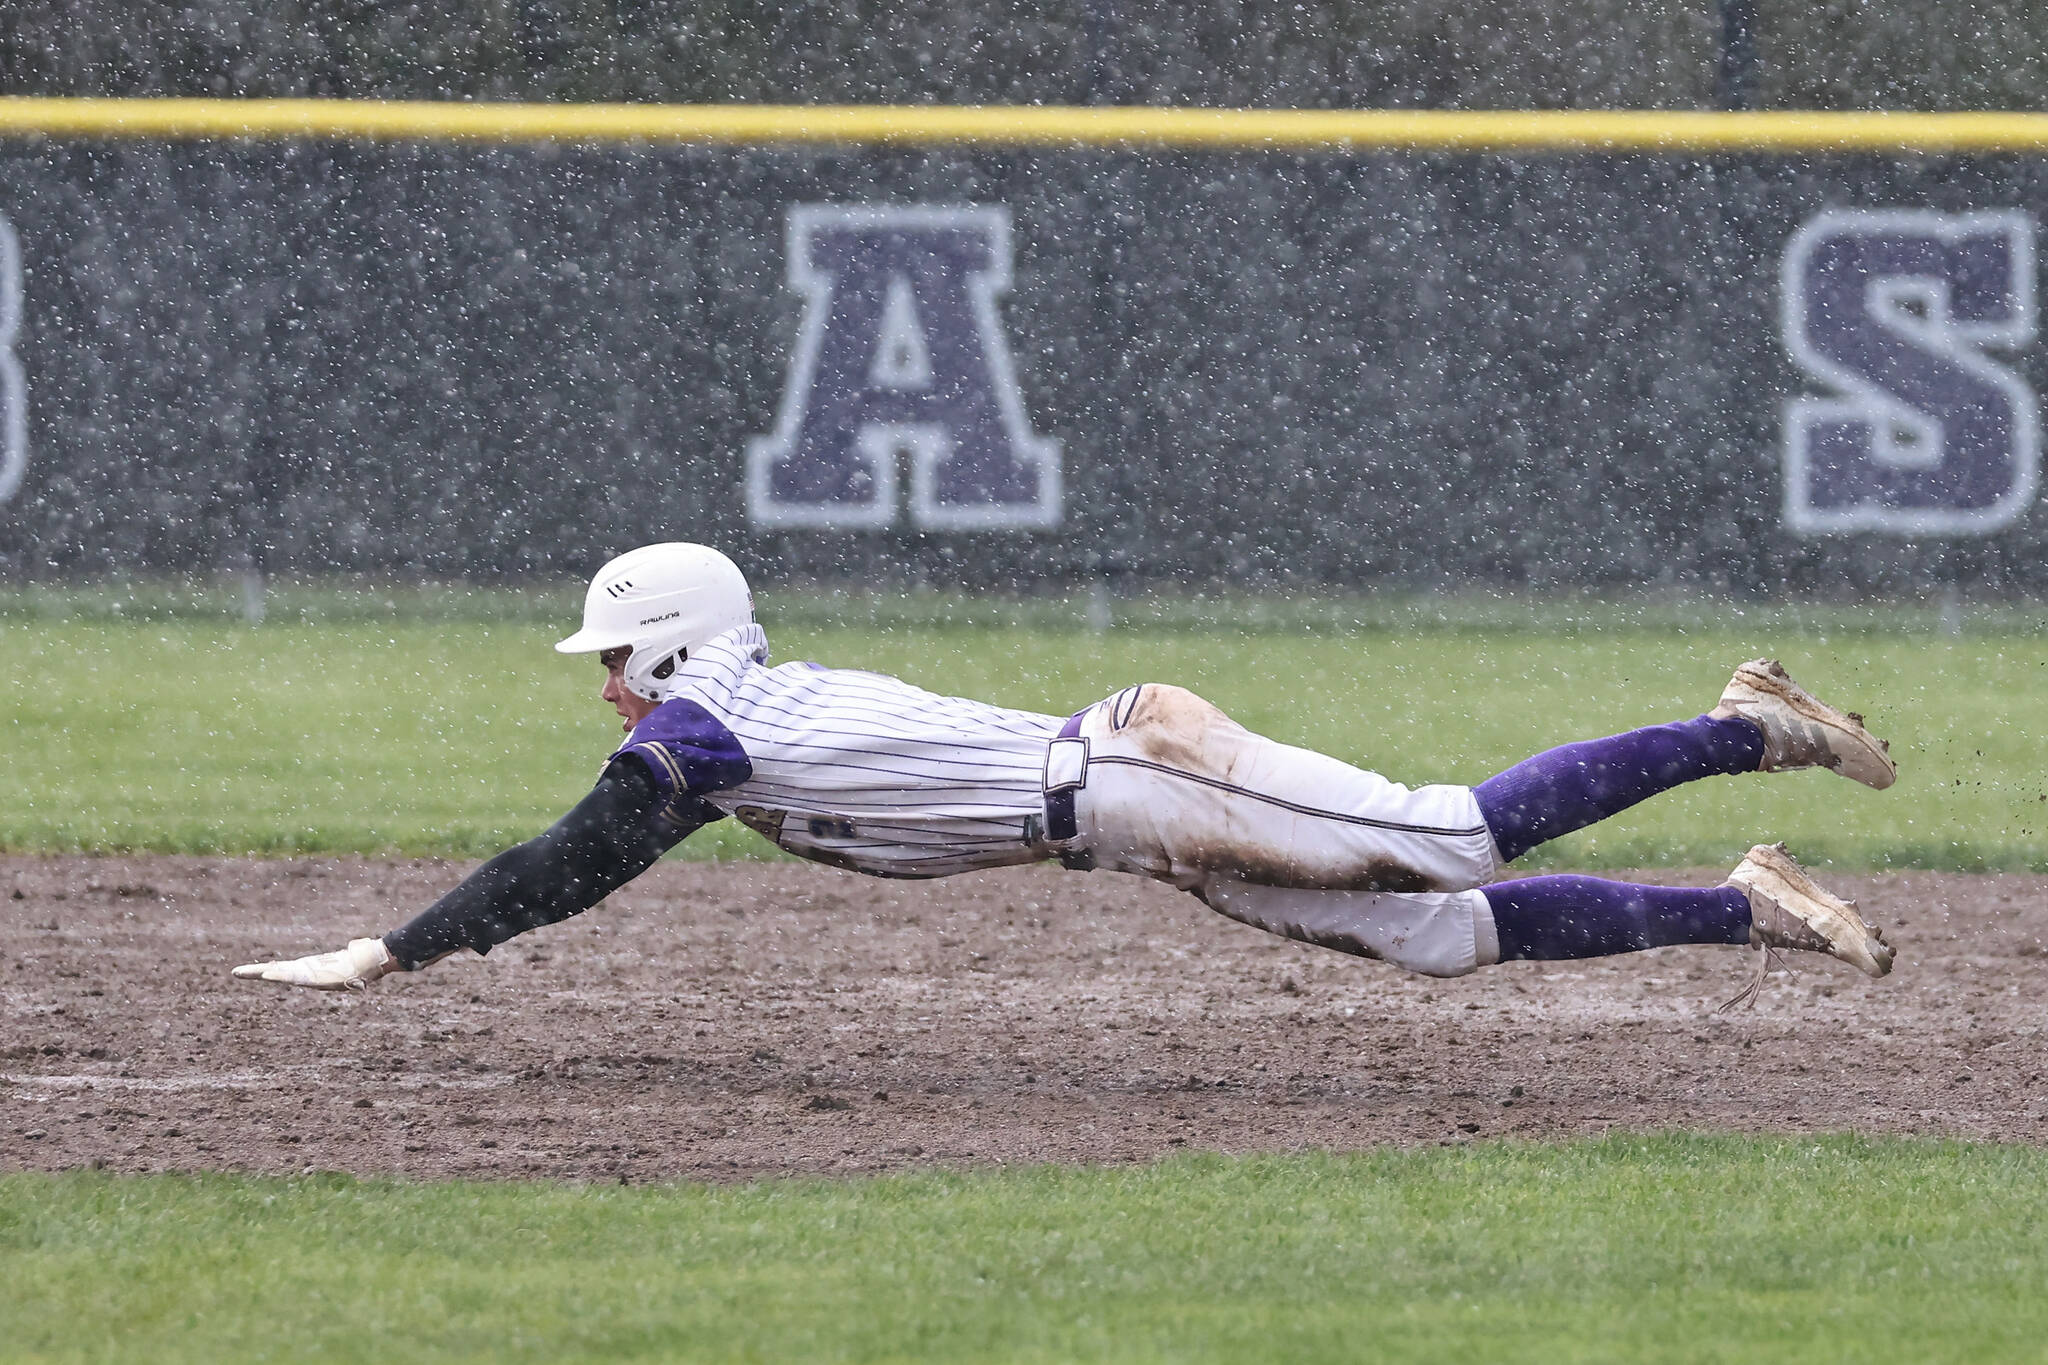 Photo by John Fisken
Oak Harbor High School baseball player Gage McLeod dives for the base during a rainy game against Anacortes April 4. Despite adverse weather conditions, the Wildcats were victorious.